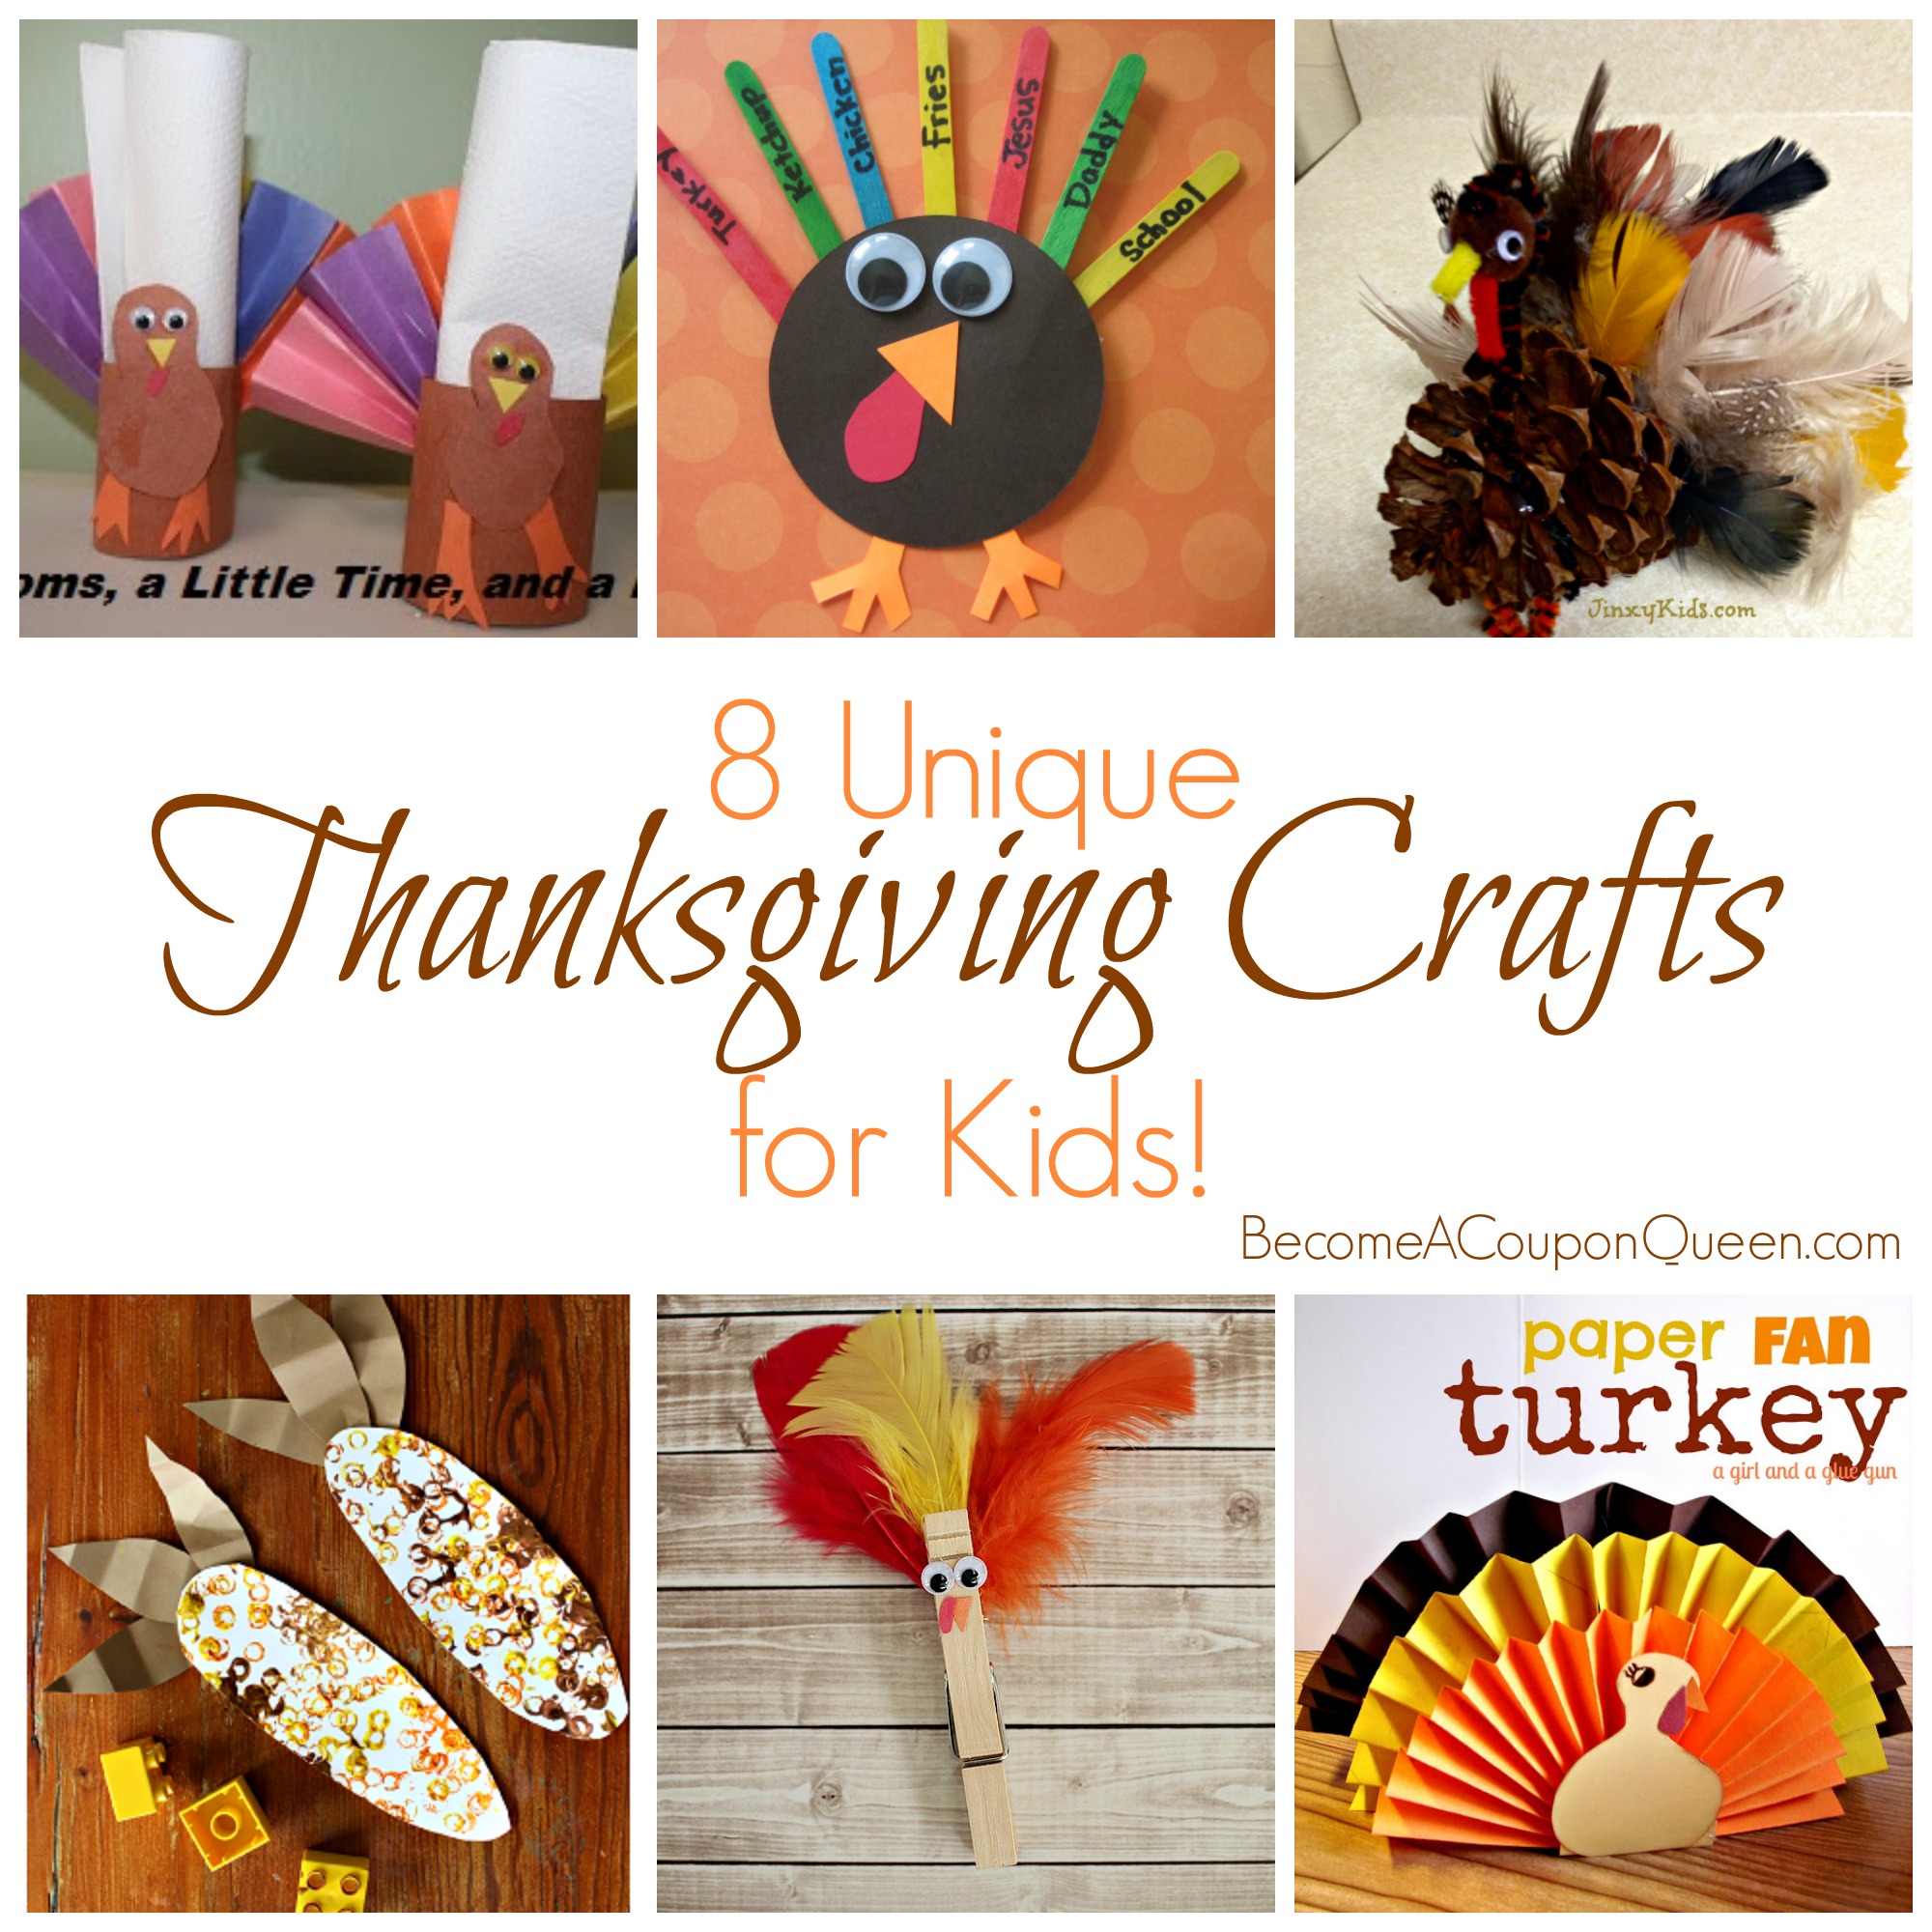 8 Unique Thanksgiving Crafts for Kids - Become a Coupon Queen